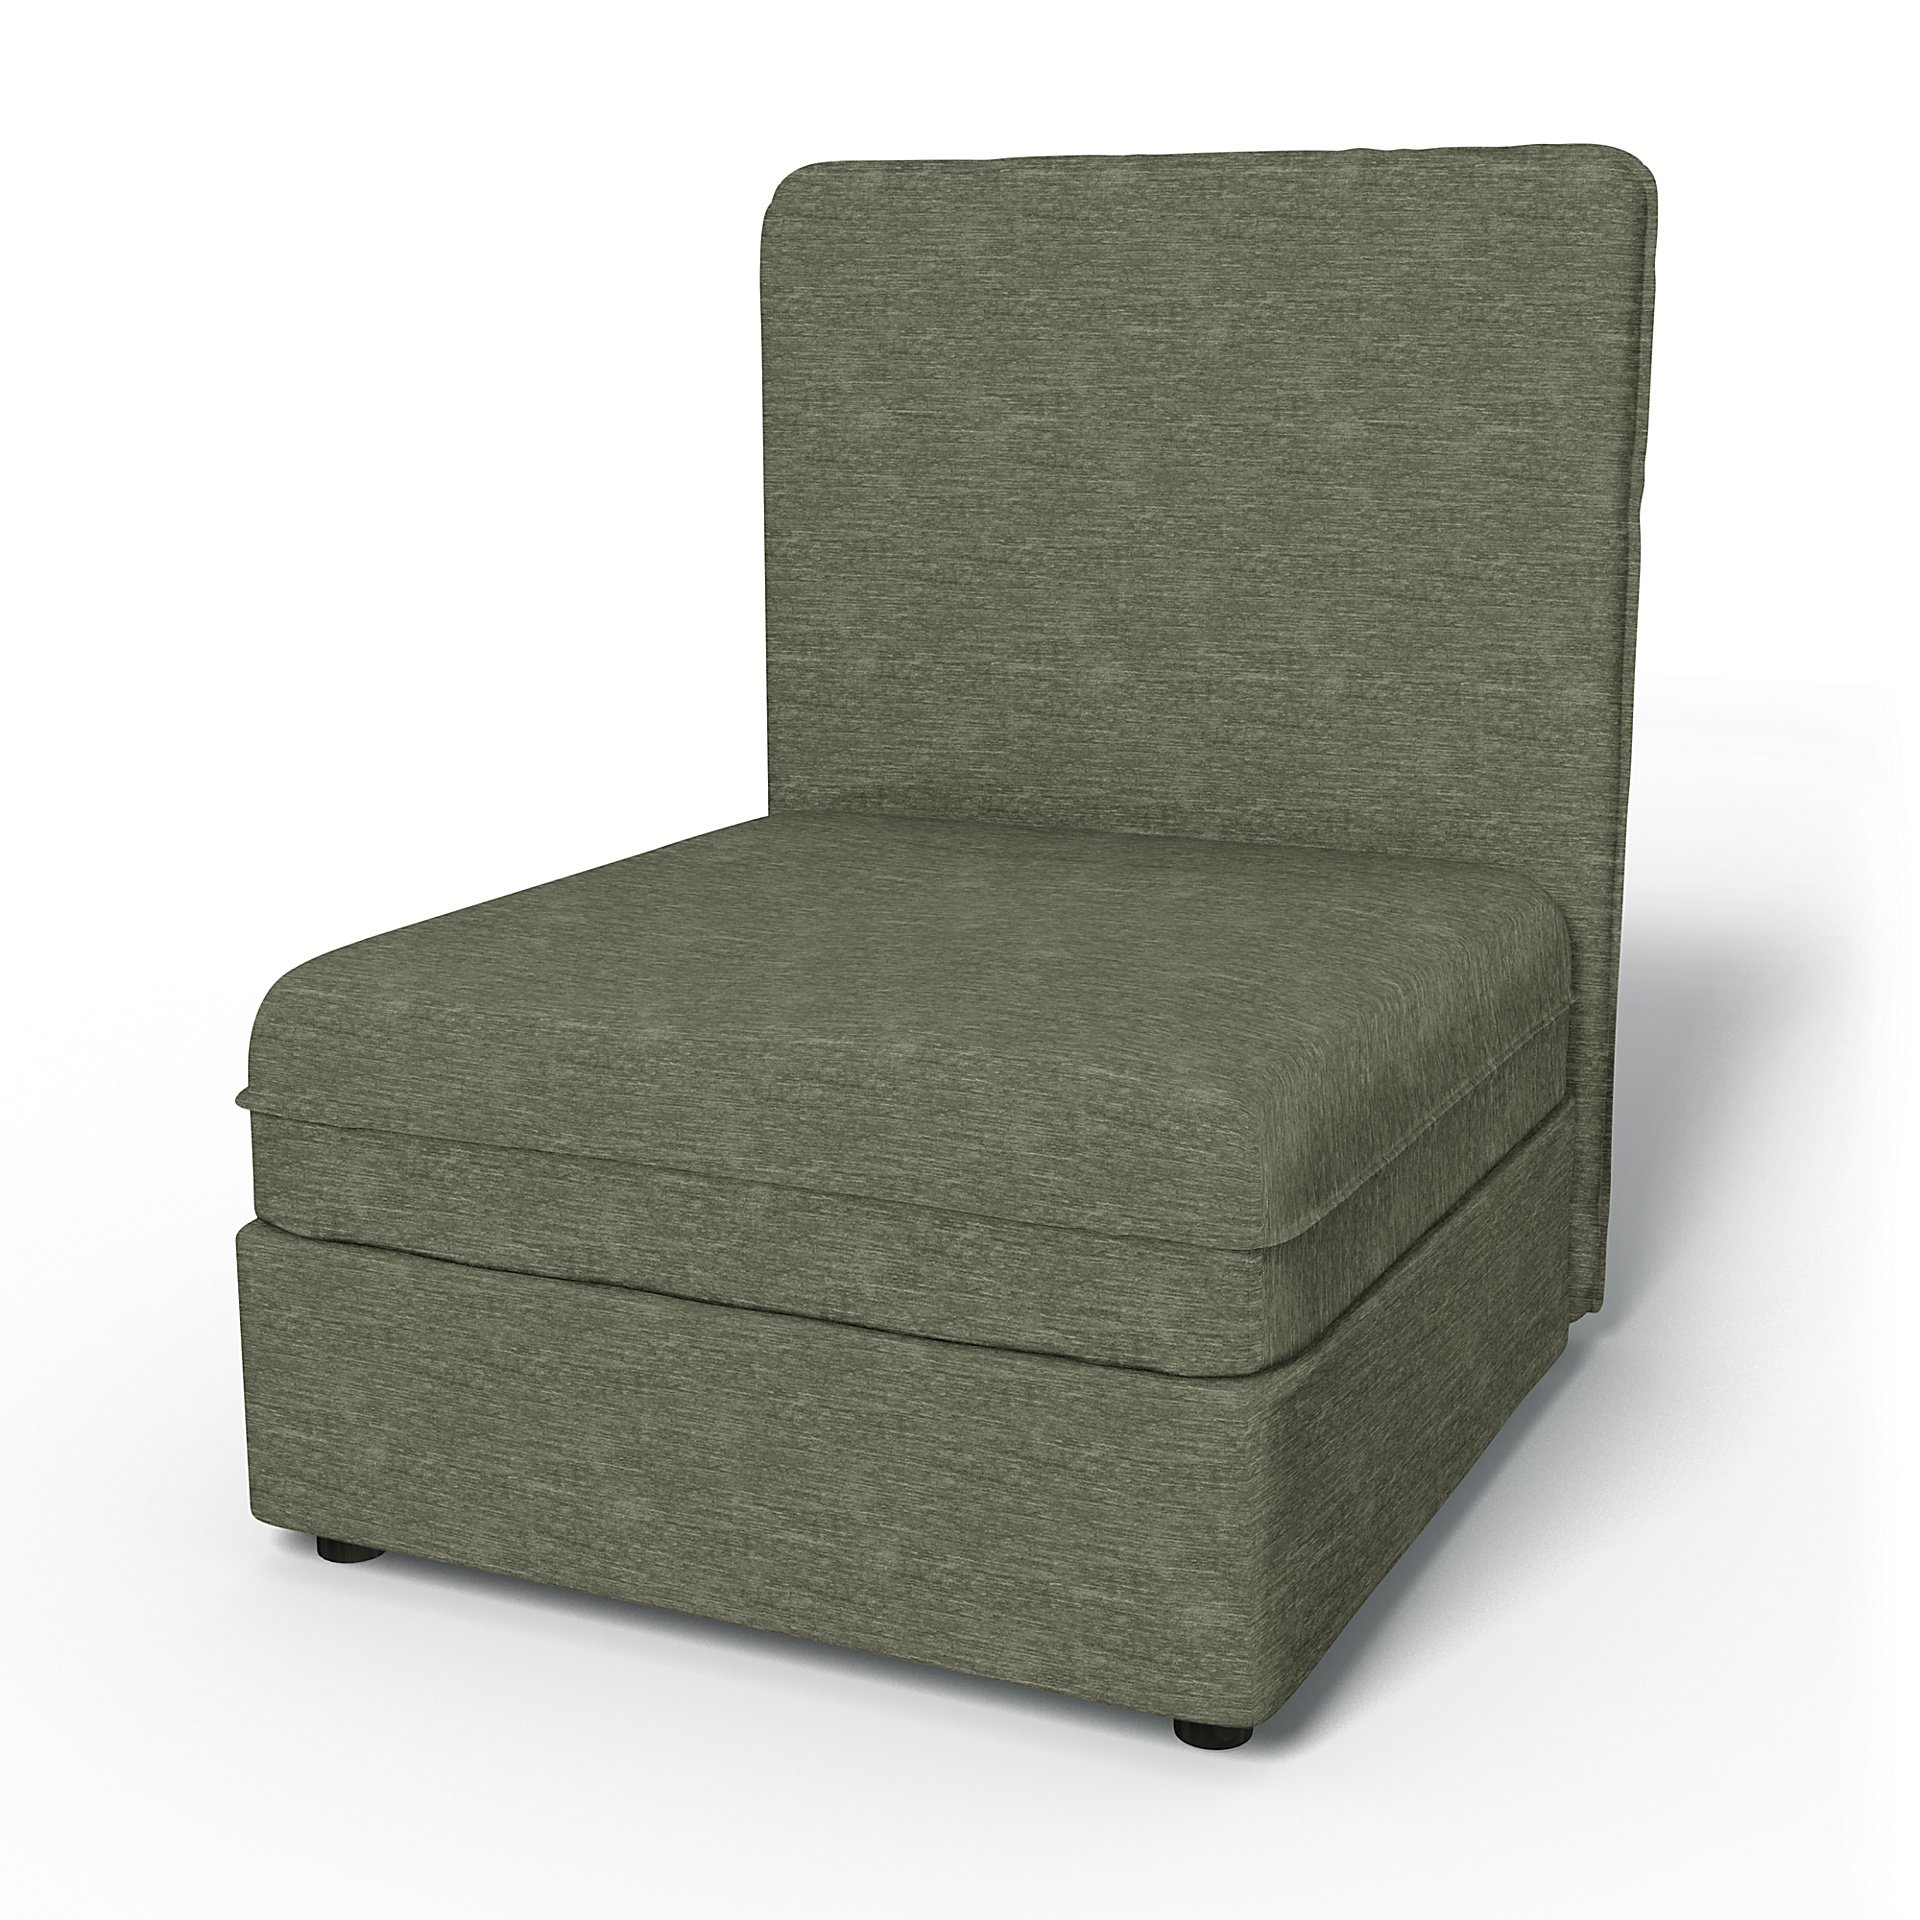 IKEA - Vallentuna Seat Module with High Back and Storage Cover 80x100cm 32x39in, Green Grey, Velvet 